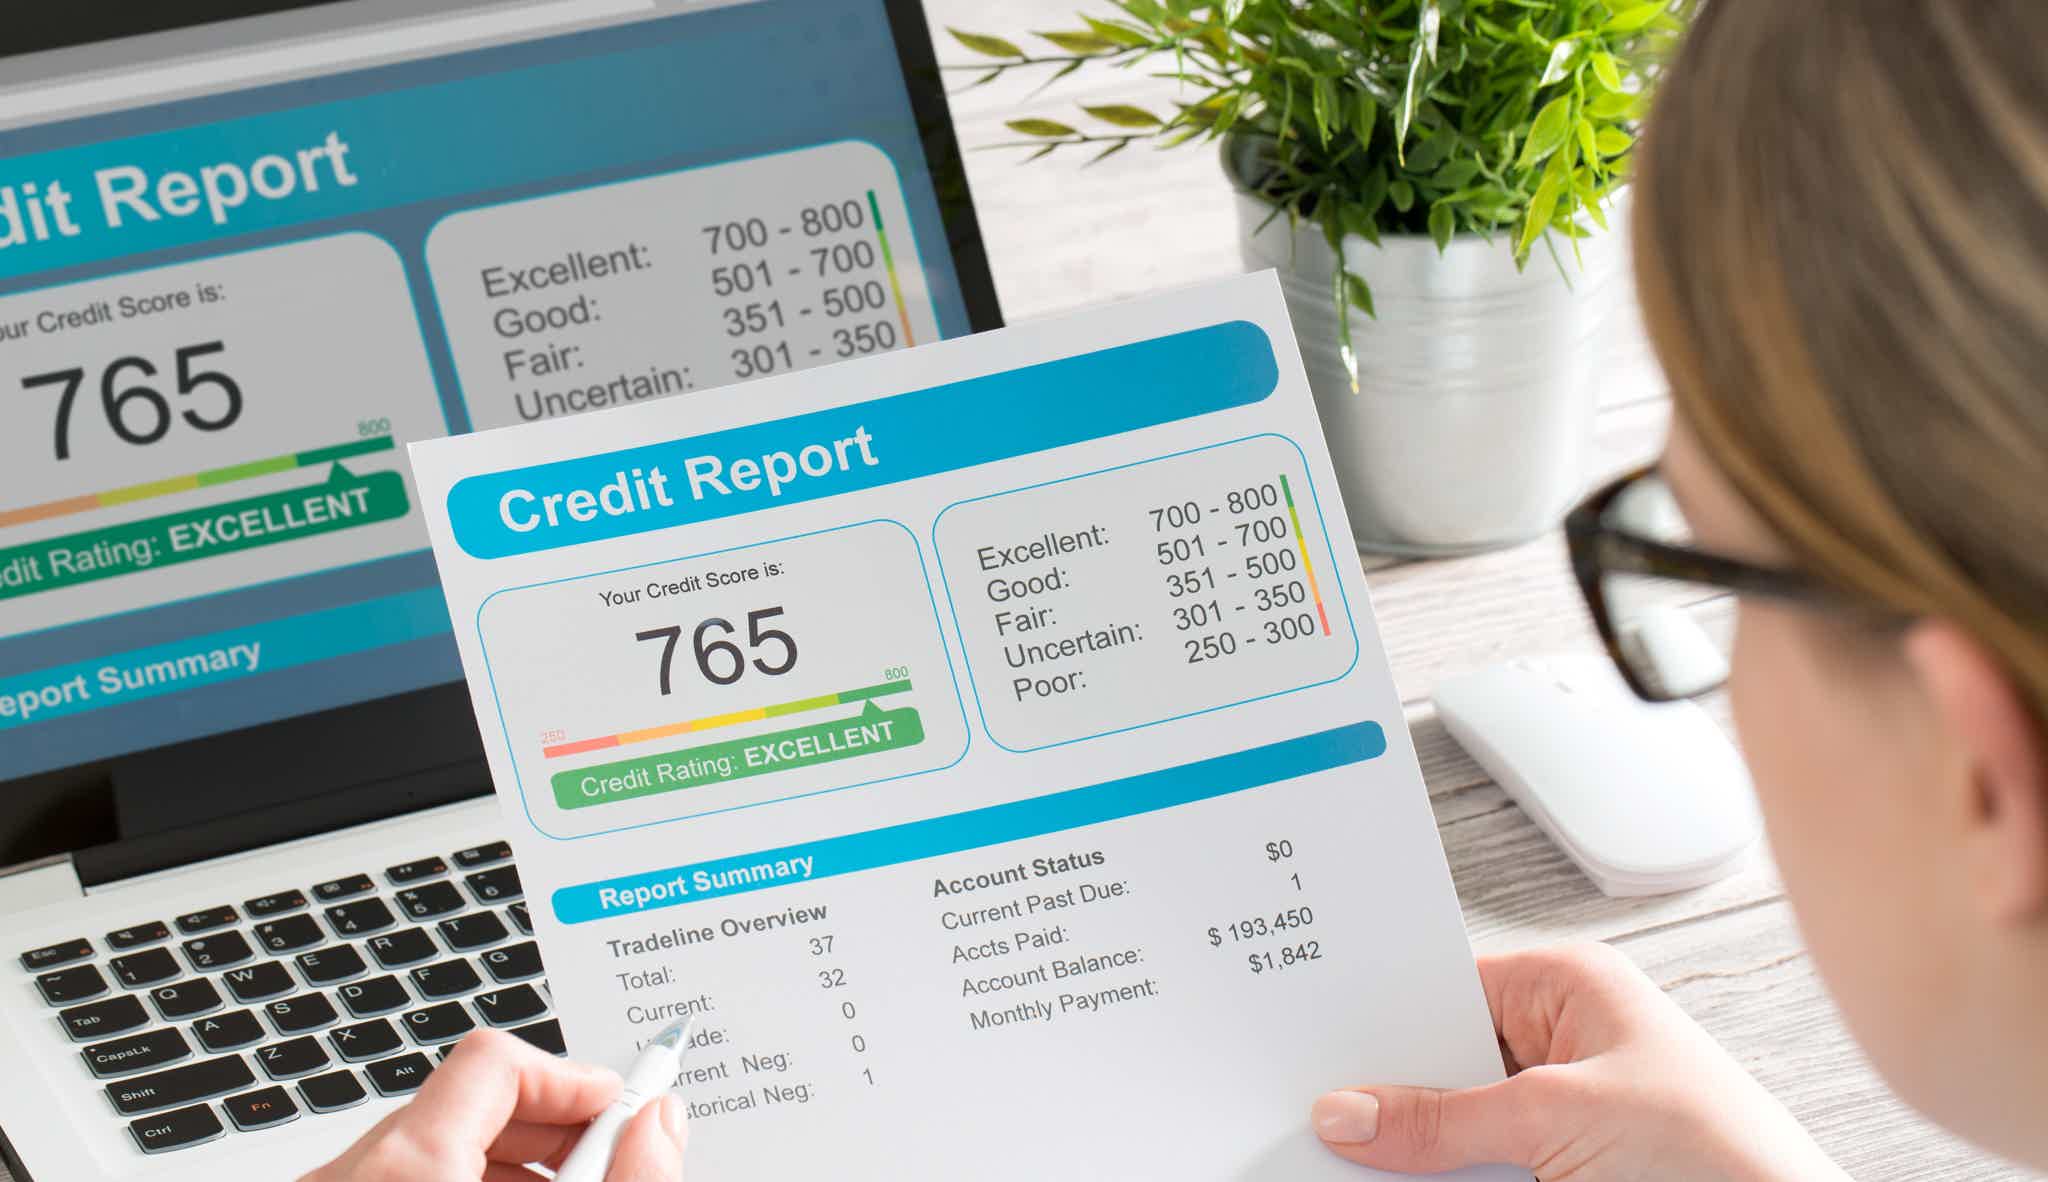 You can check your credit report to improve your credit score. Source: Adobe Stock.